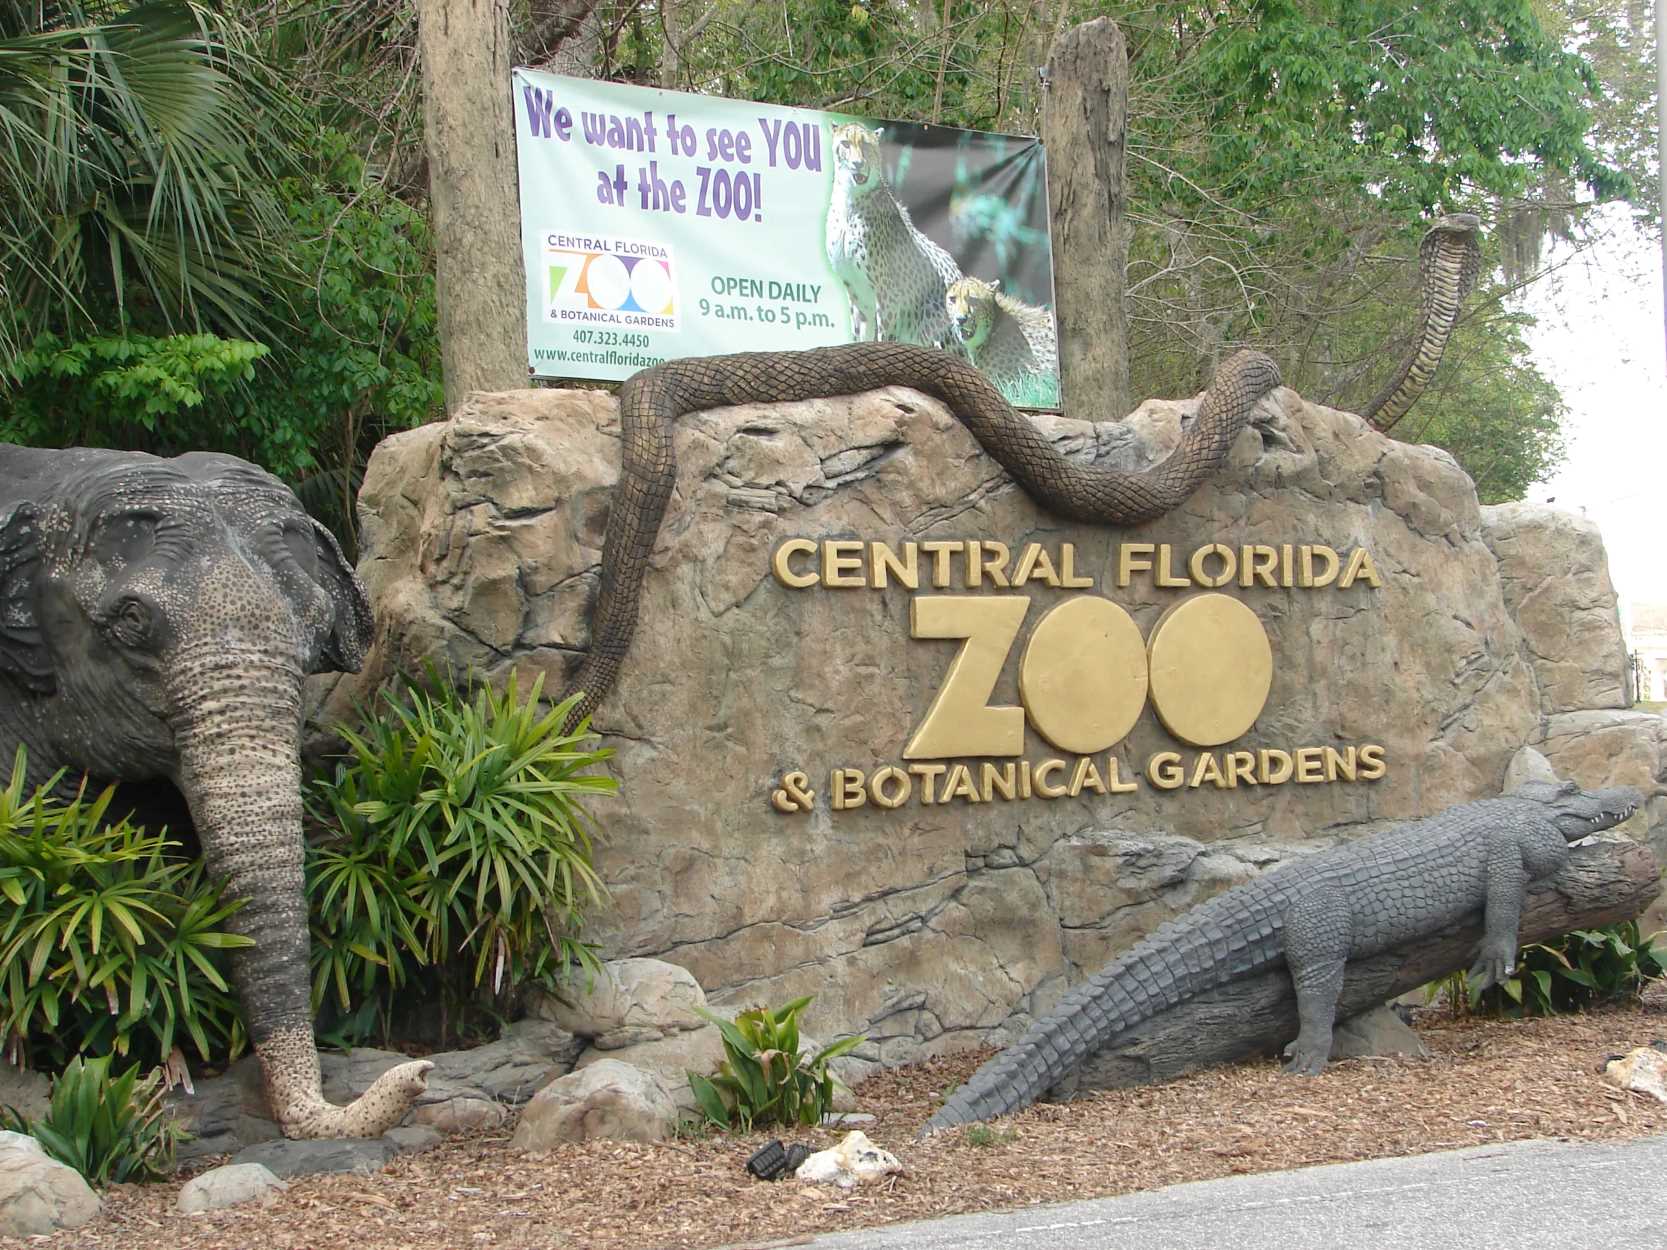 14-captivating-facts-about-central-florida-zoo-and-botanical-gardens